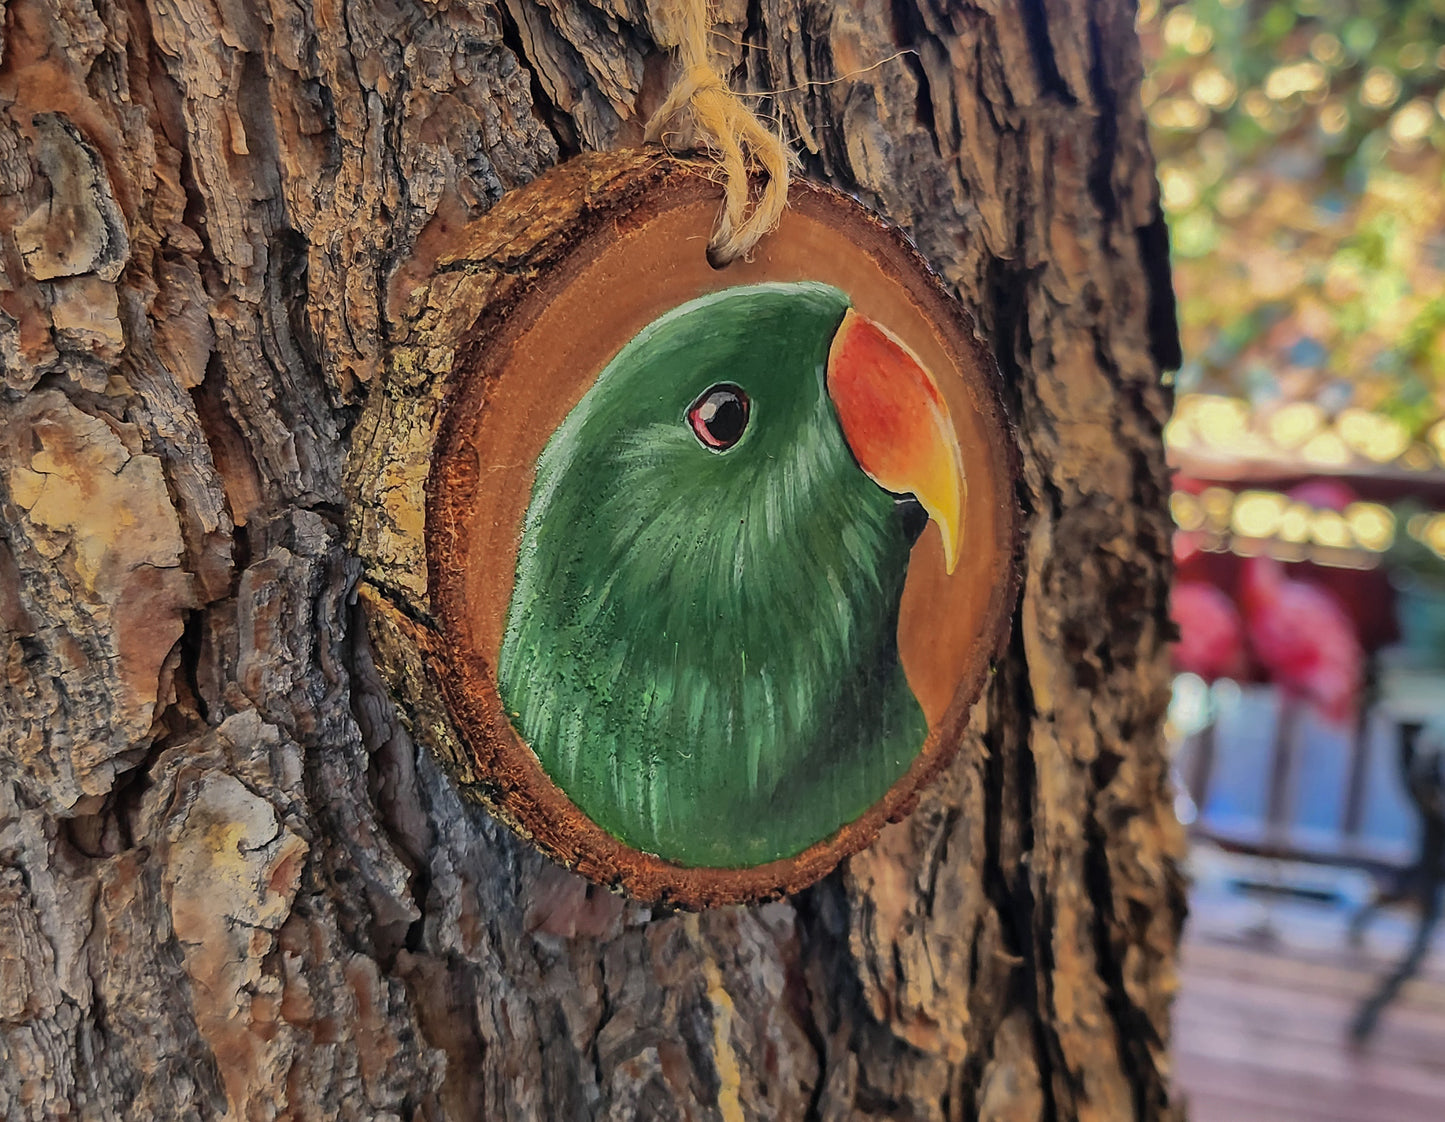 Eclectus Parrot - Wood Ornament, Hand Painted Parrot on Wood, Green Eclectus, Male Eclectus Parrot